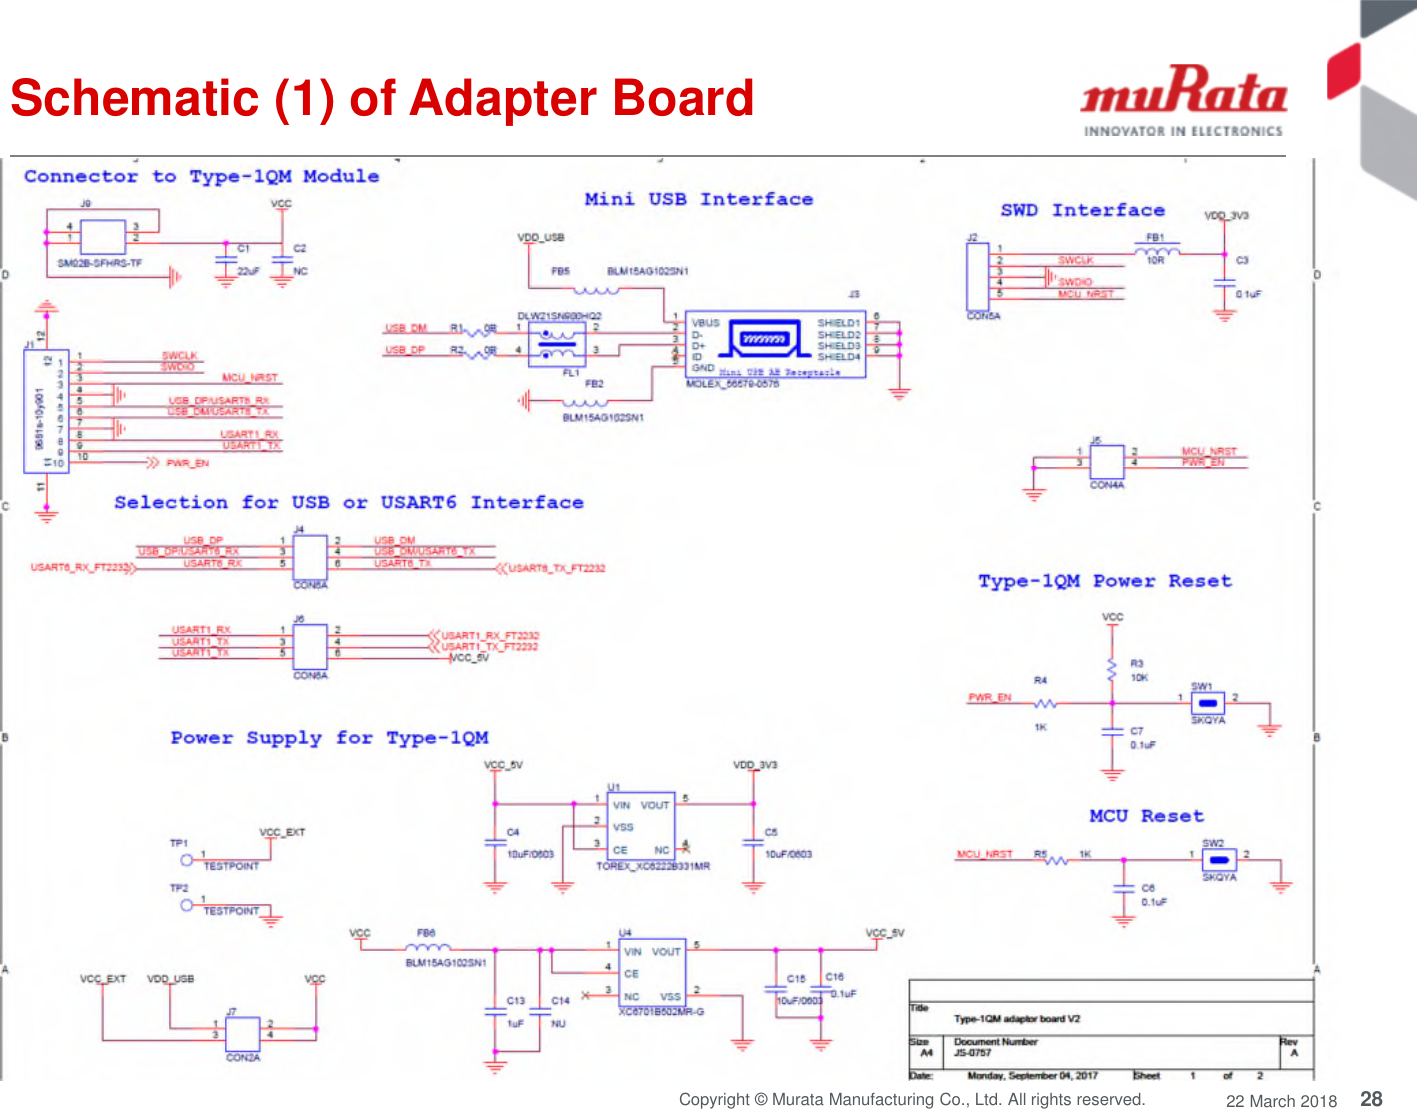 28Copyright © Murata Manufacturing Co., Ltd. All rights reserved. 22 March 2018Schematic (1) of Adapter Board